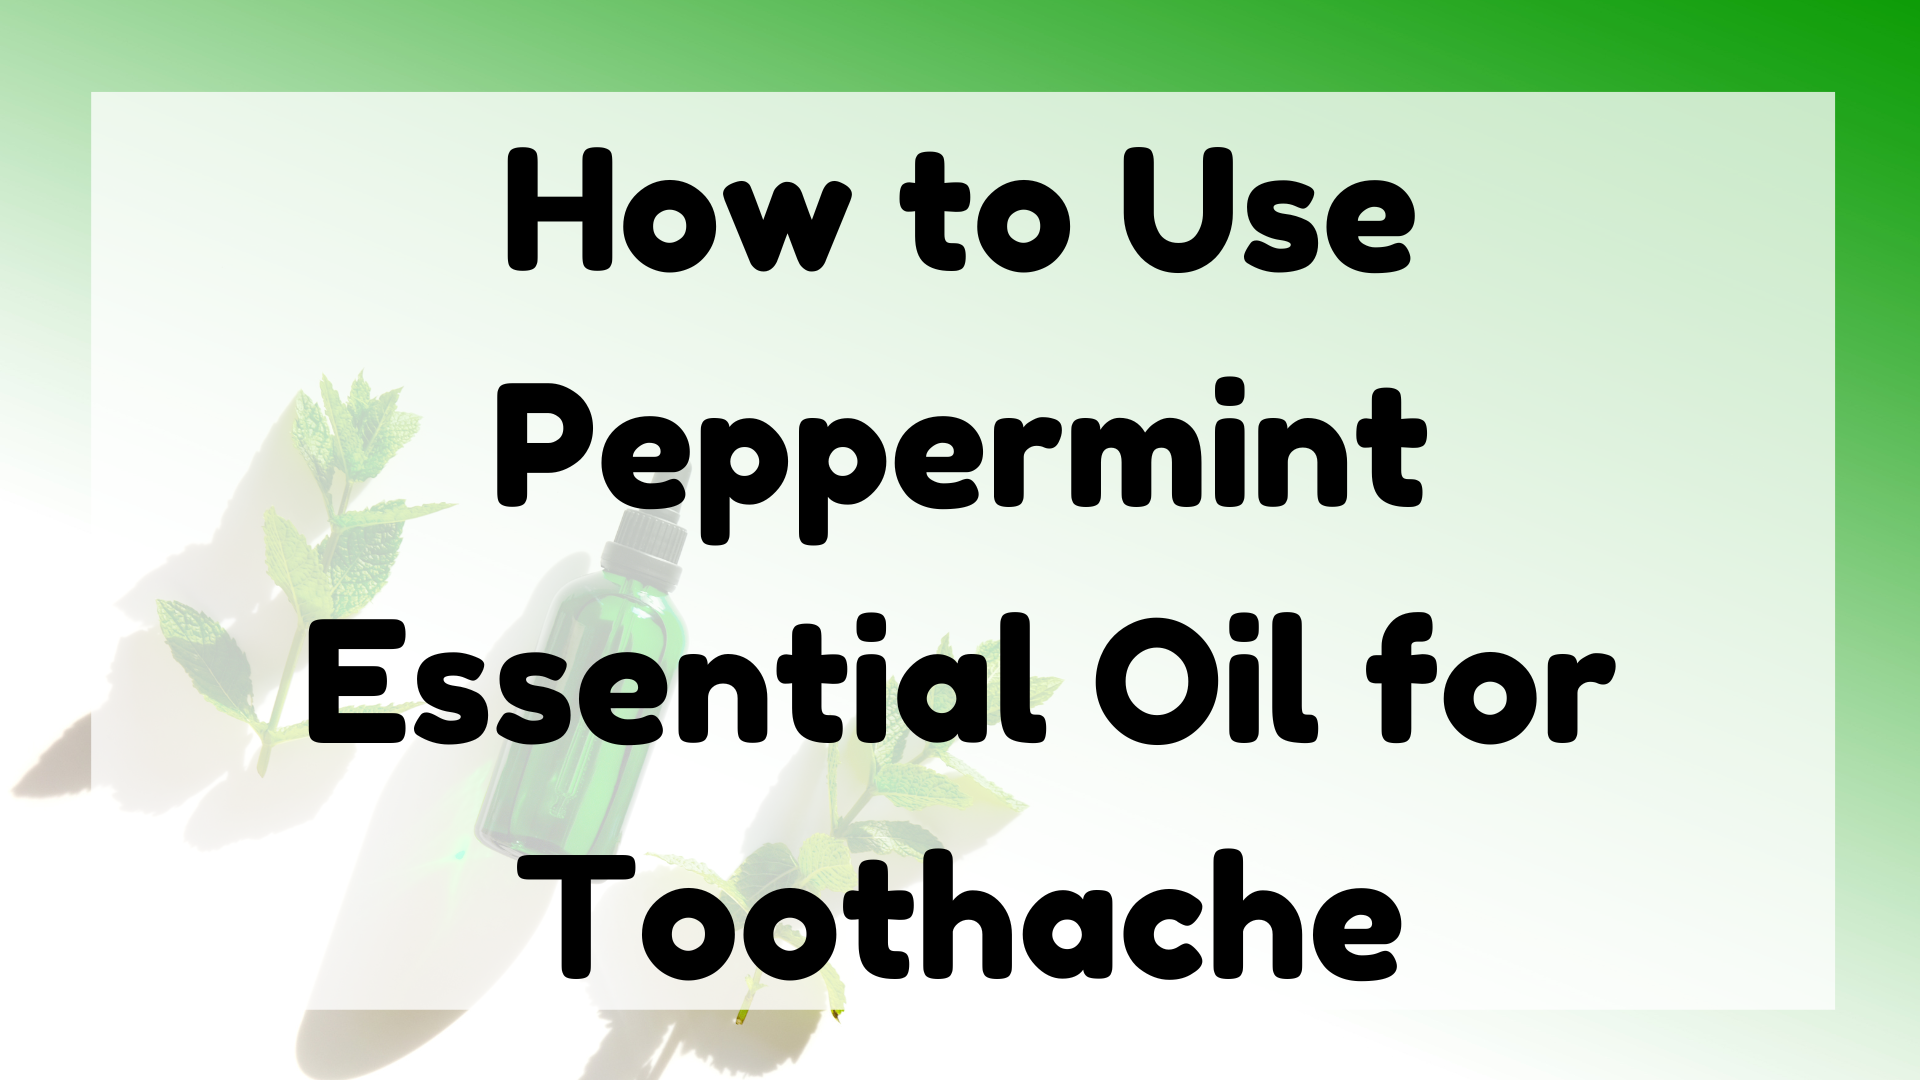 How to Use Peppermint Essential Oil for Toothache featured image